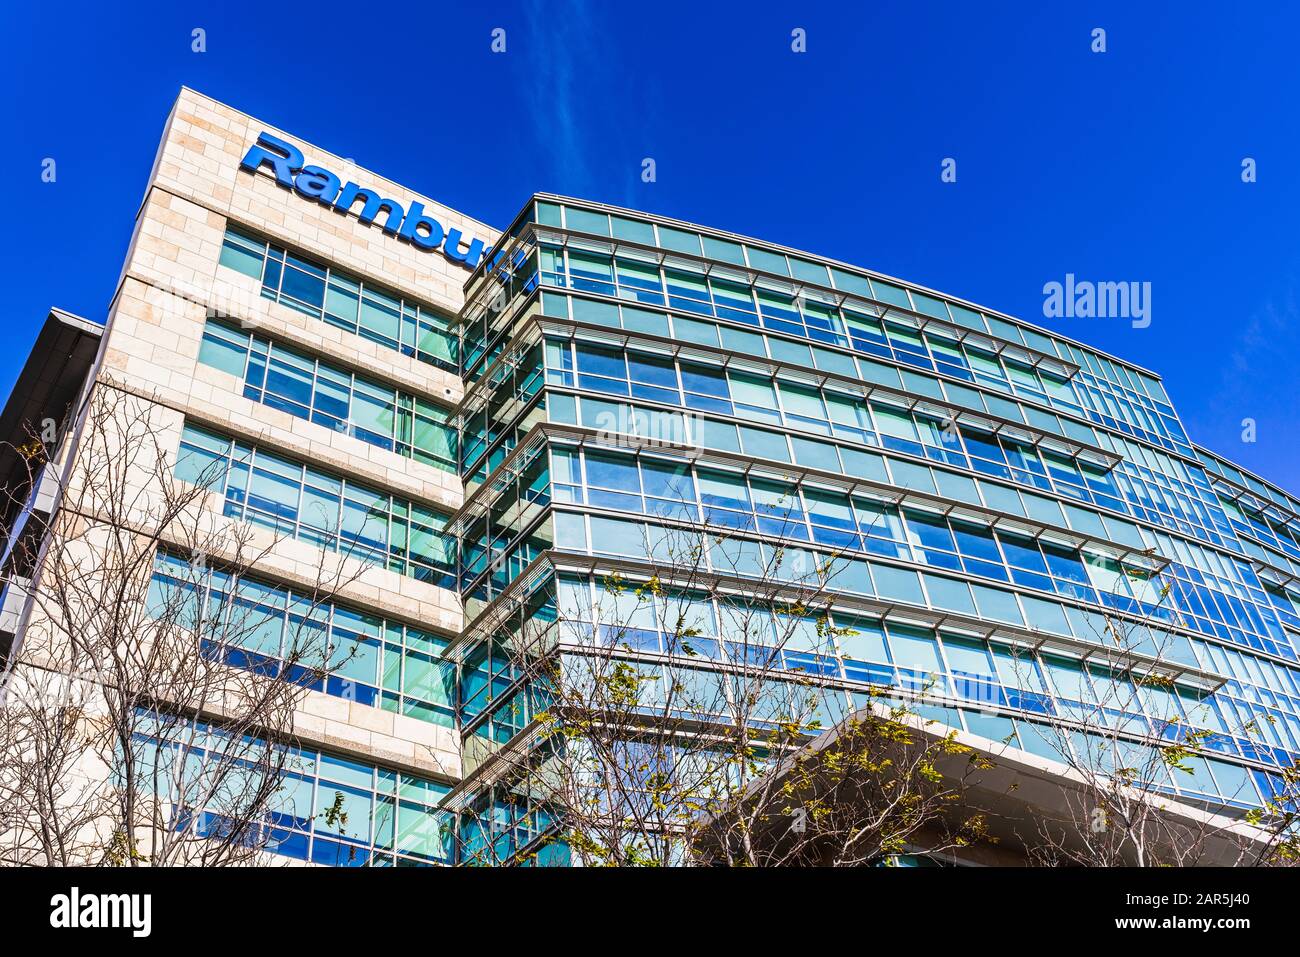 Jan 24, 2020 Sunnyvale / CA / USA - Rambus corporate headquarters in Silicon Valley. Rambus Inc. is an American technology licensing company specializ Stock Photo